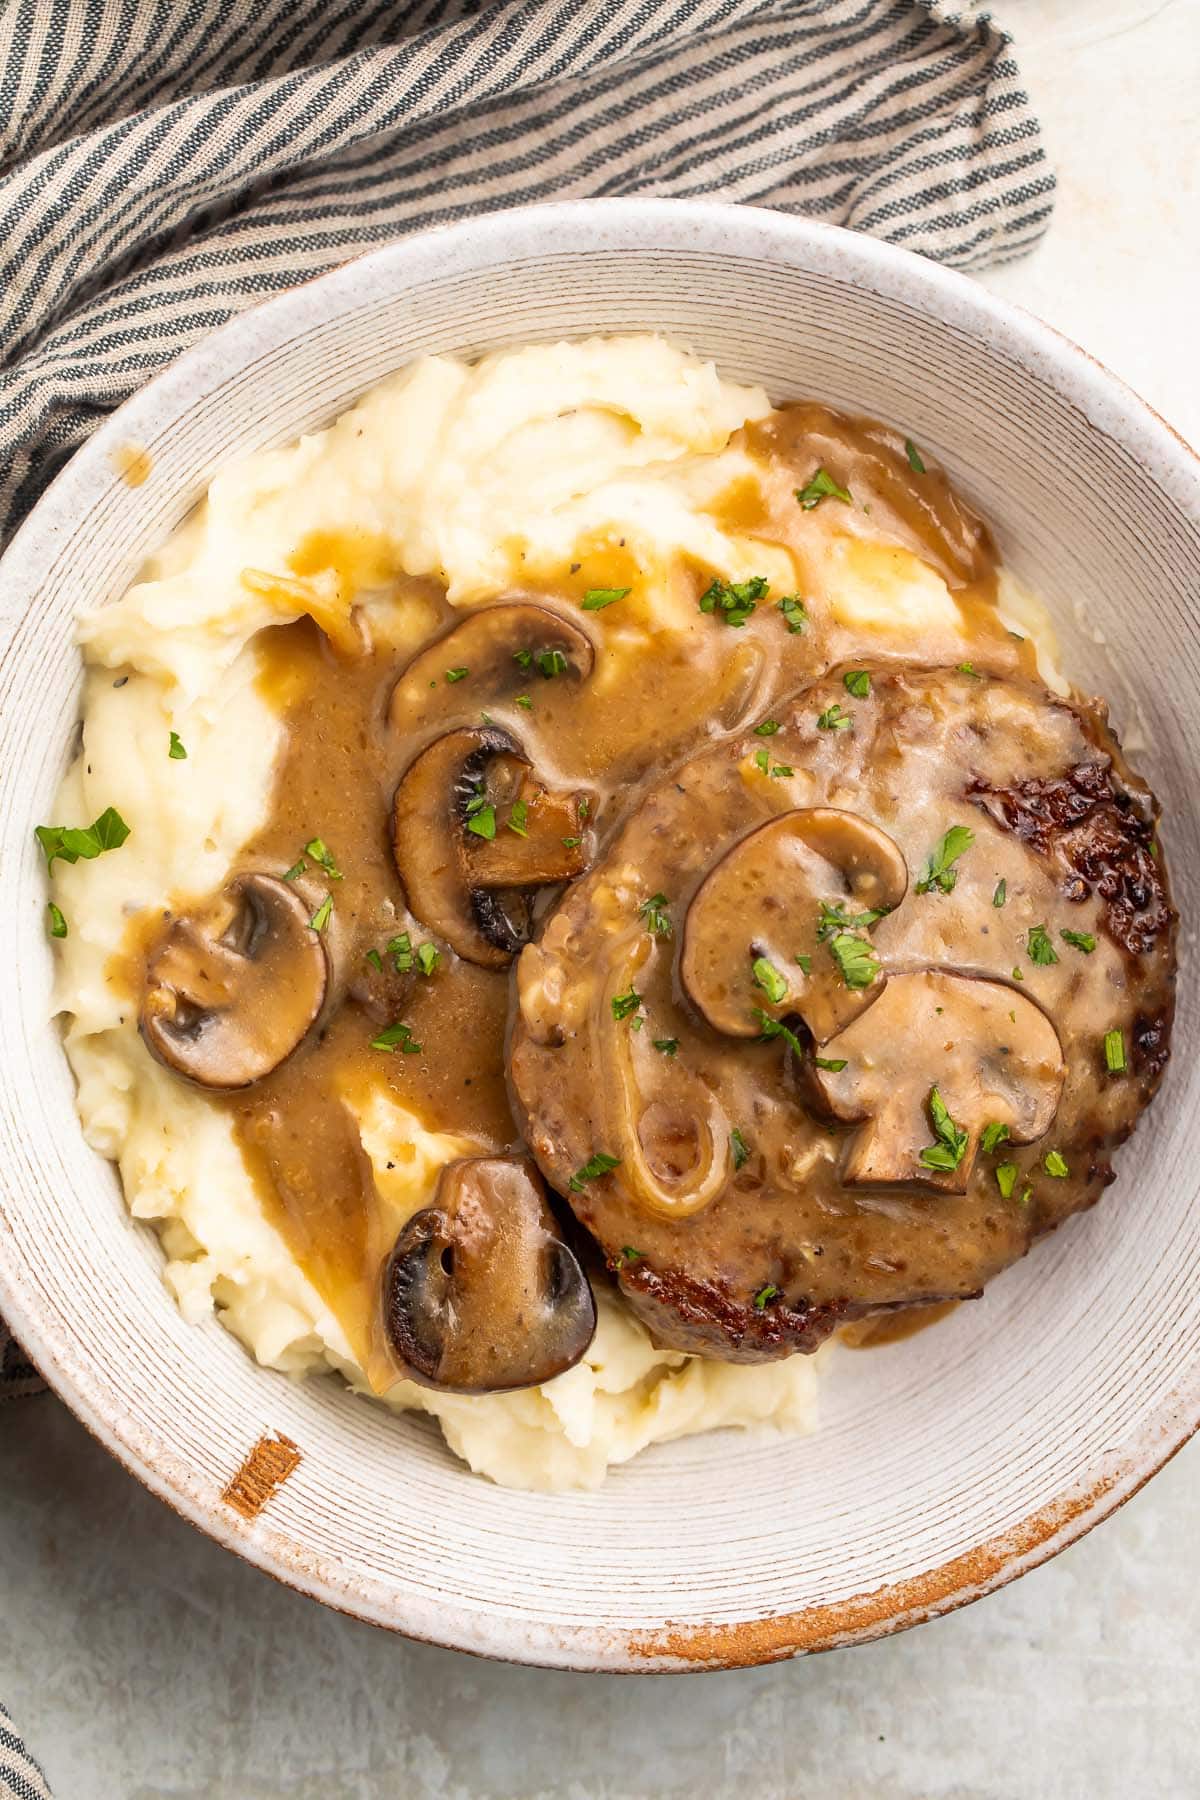 A large bowl of Whole30 salisbury steak and mashed potatoes smothered in plenty of brown gravy.